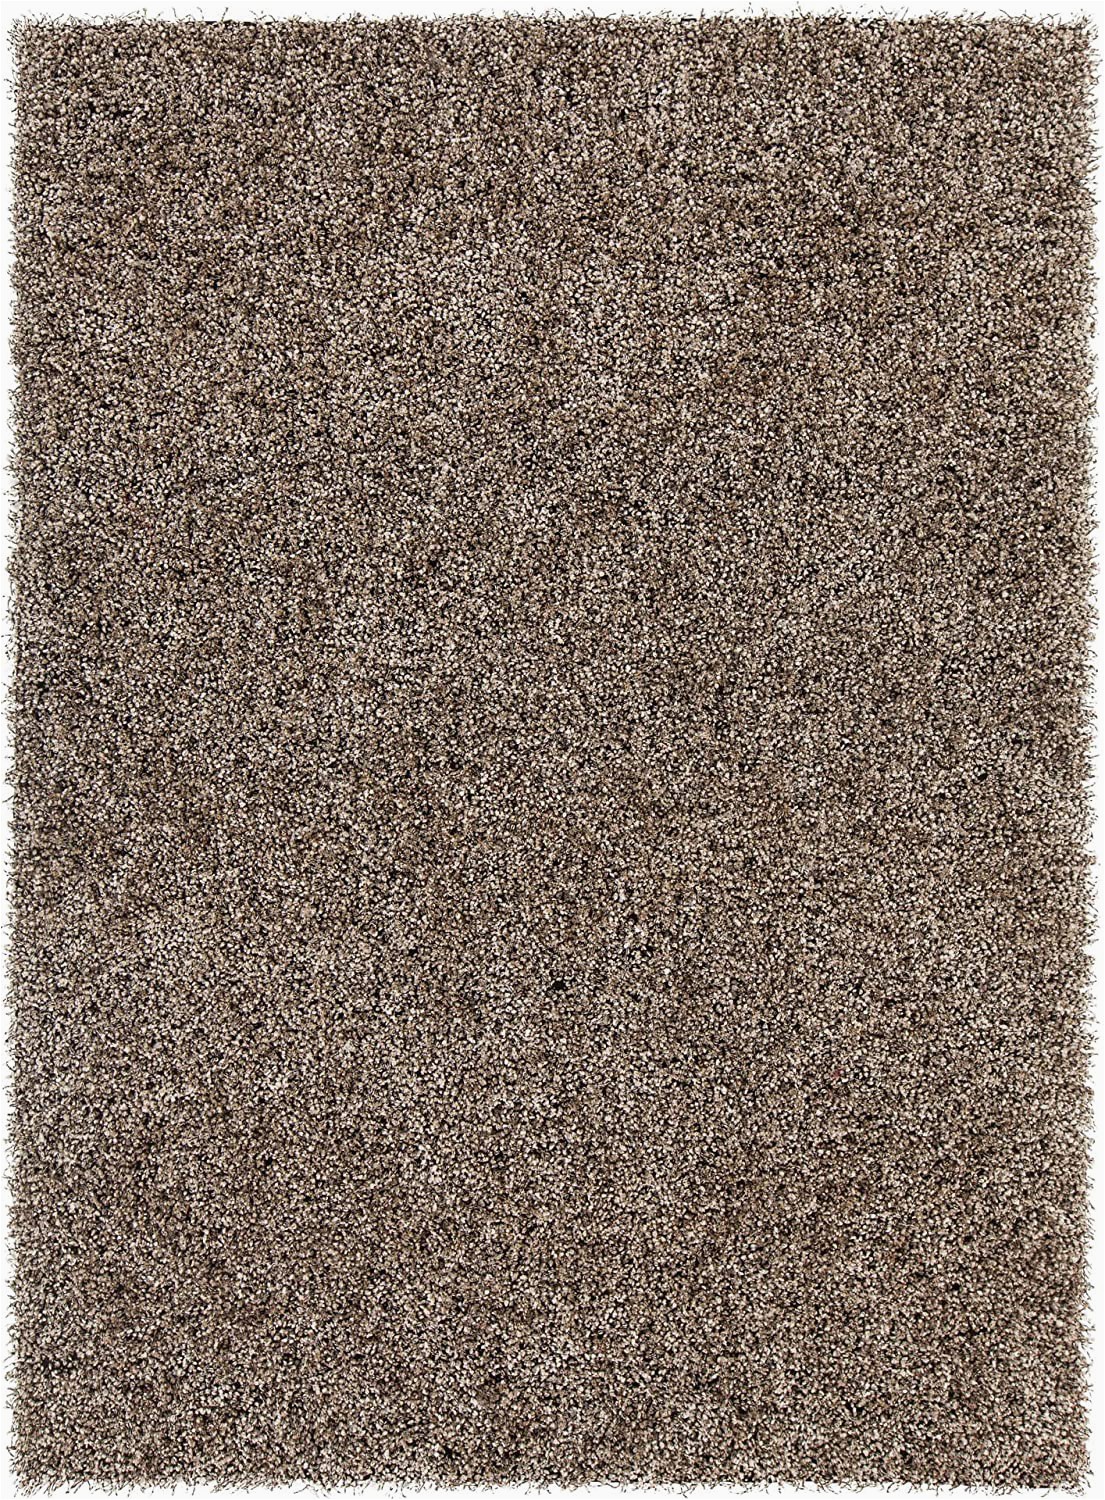 Mohawk area Rug 60 X 84 Amazon Chandra Rugs Blossom area Rug 60 Inch by 84